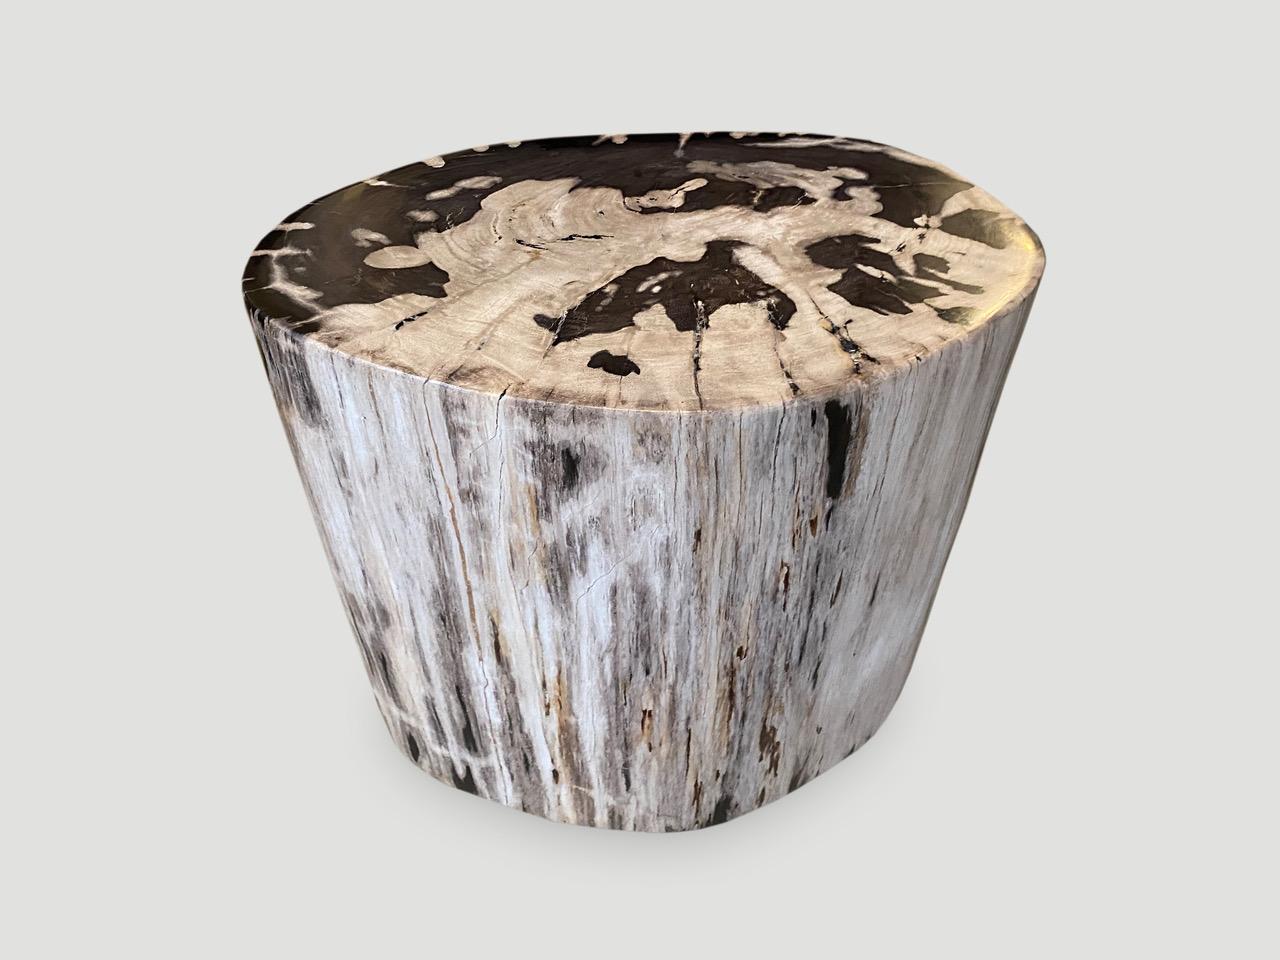 Stunning bold tones on this impressive high quality petrified wood side table. It’s fascinating how Mother Nature produces these stunning 40 million year old petrified teak logs with such contrasting colors with natural patterns throughout. Modern